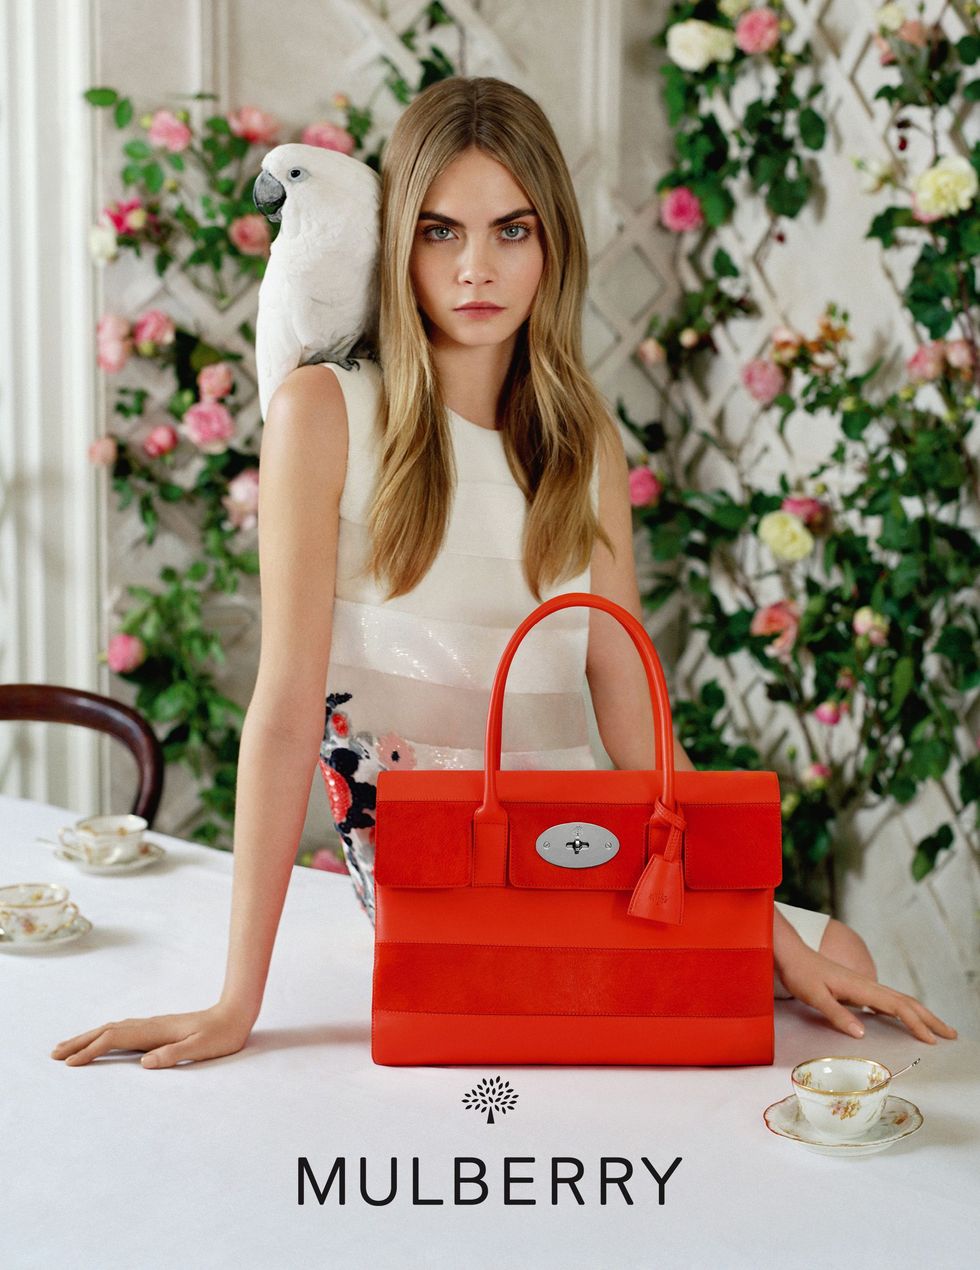 Mulberry SS 2014 Campaign featuring Cara delevigne, photographed by Tim Walker